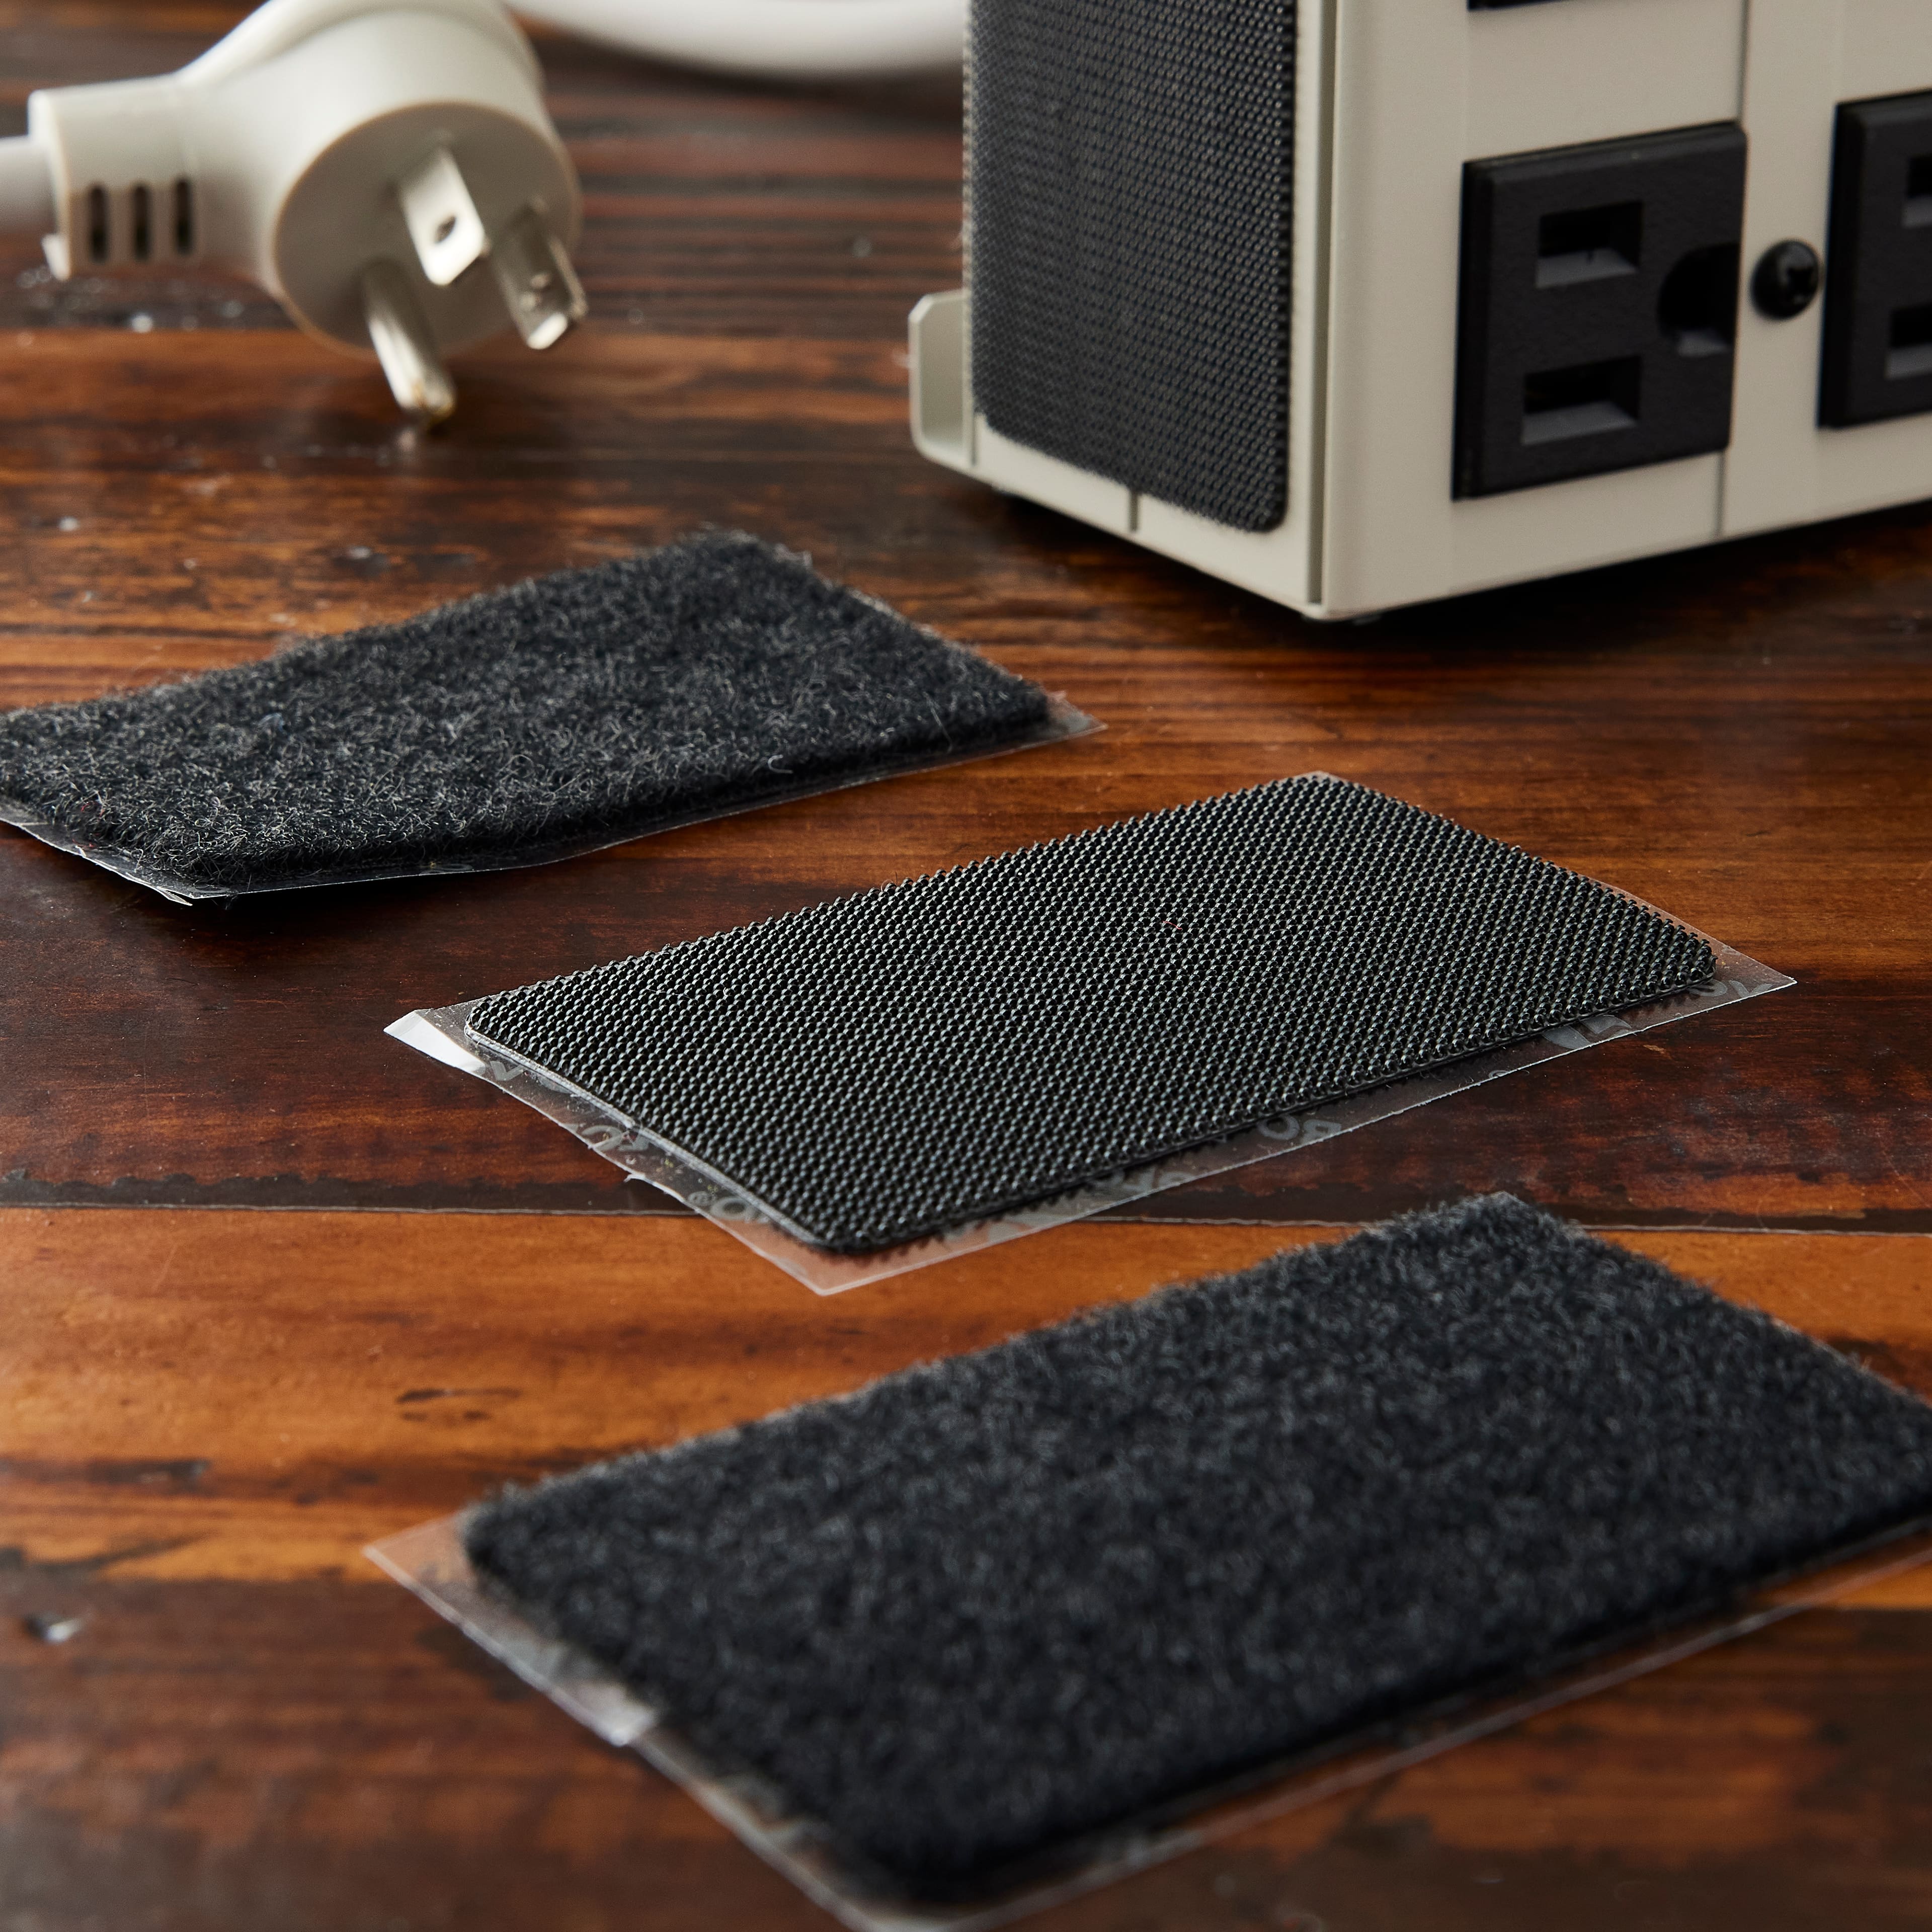 VELCRO&#xAE; Brand Recycled Industrial Strips